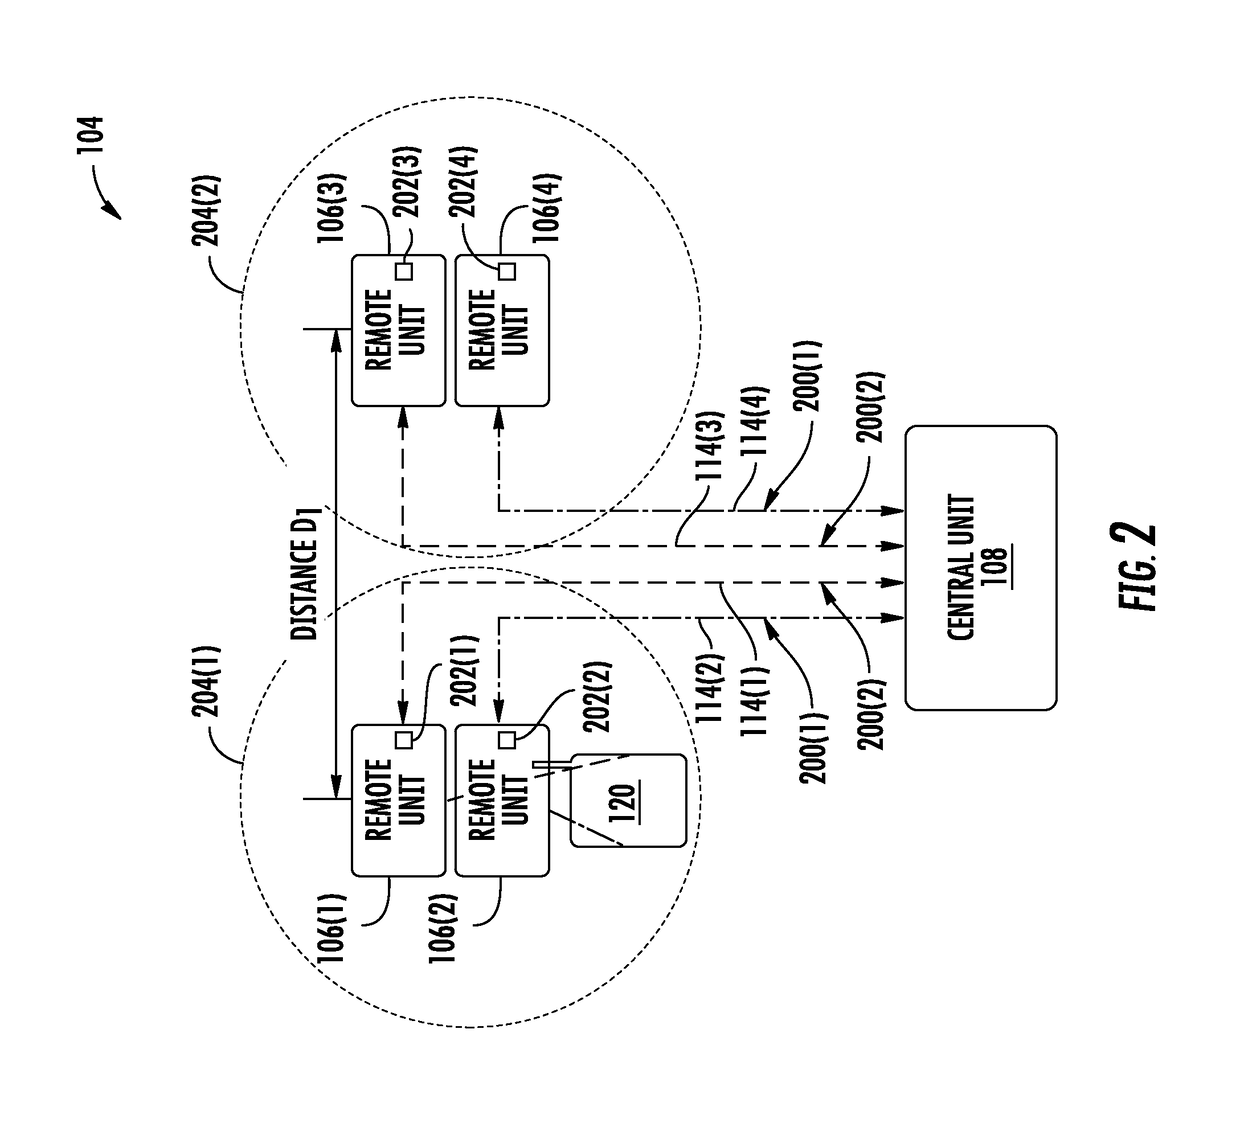 Distributing multiple-input, multiple-output (MIMO) communications streams to remove units in a distributed communication system (DCS) to support configuration of interleaved MIMO communications services